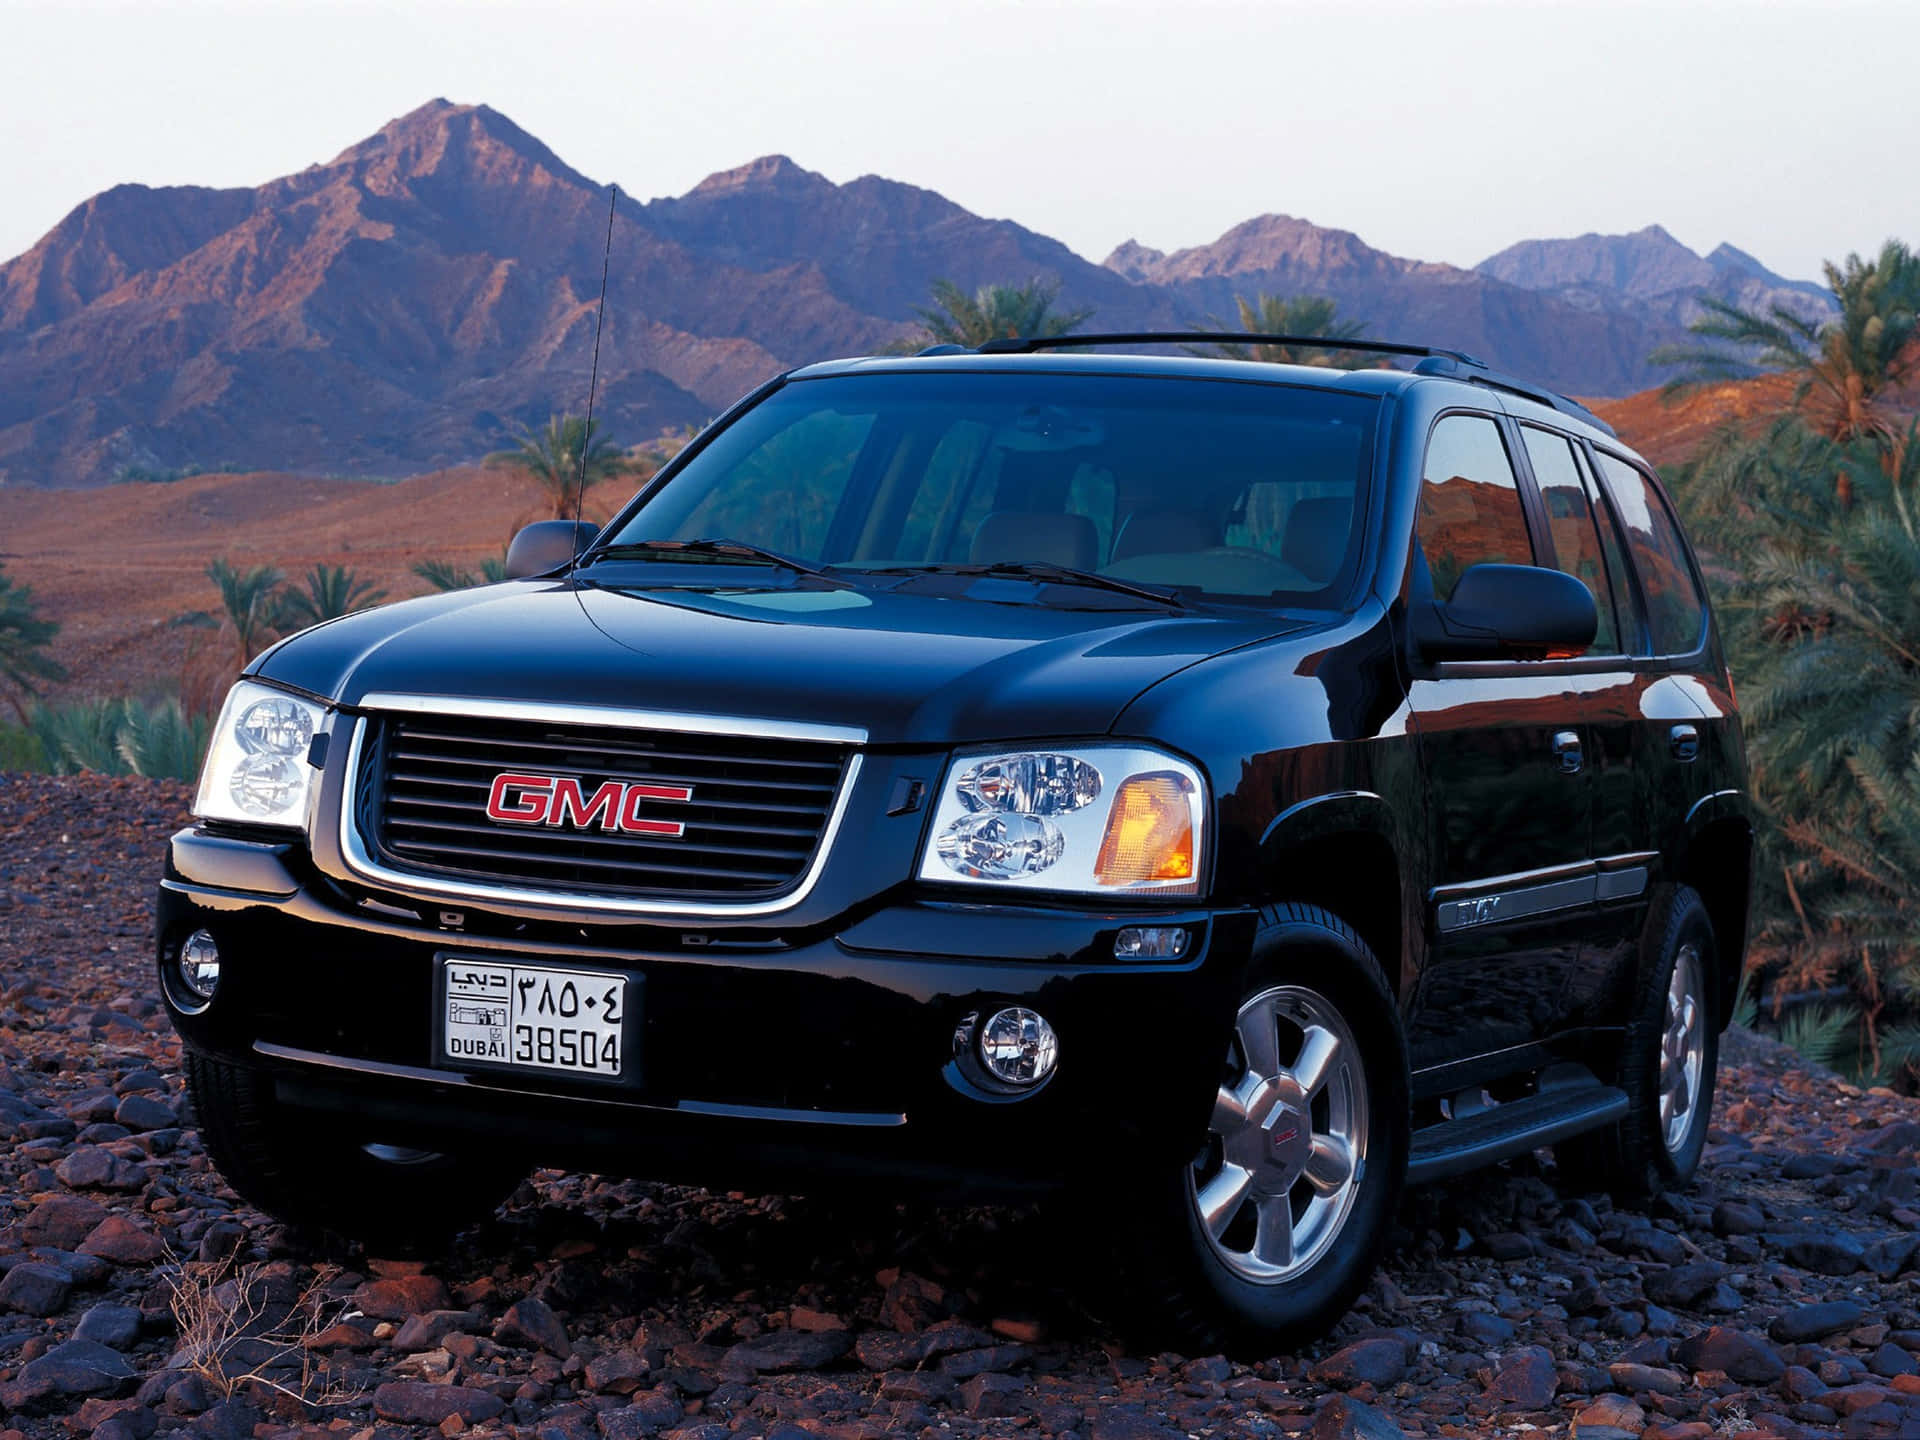 Stunning GMC Envoy in a picturesque scenery Wallpaper